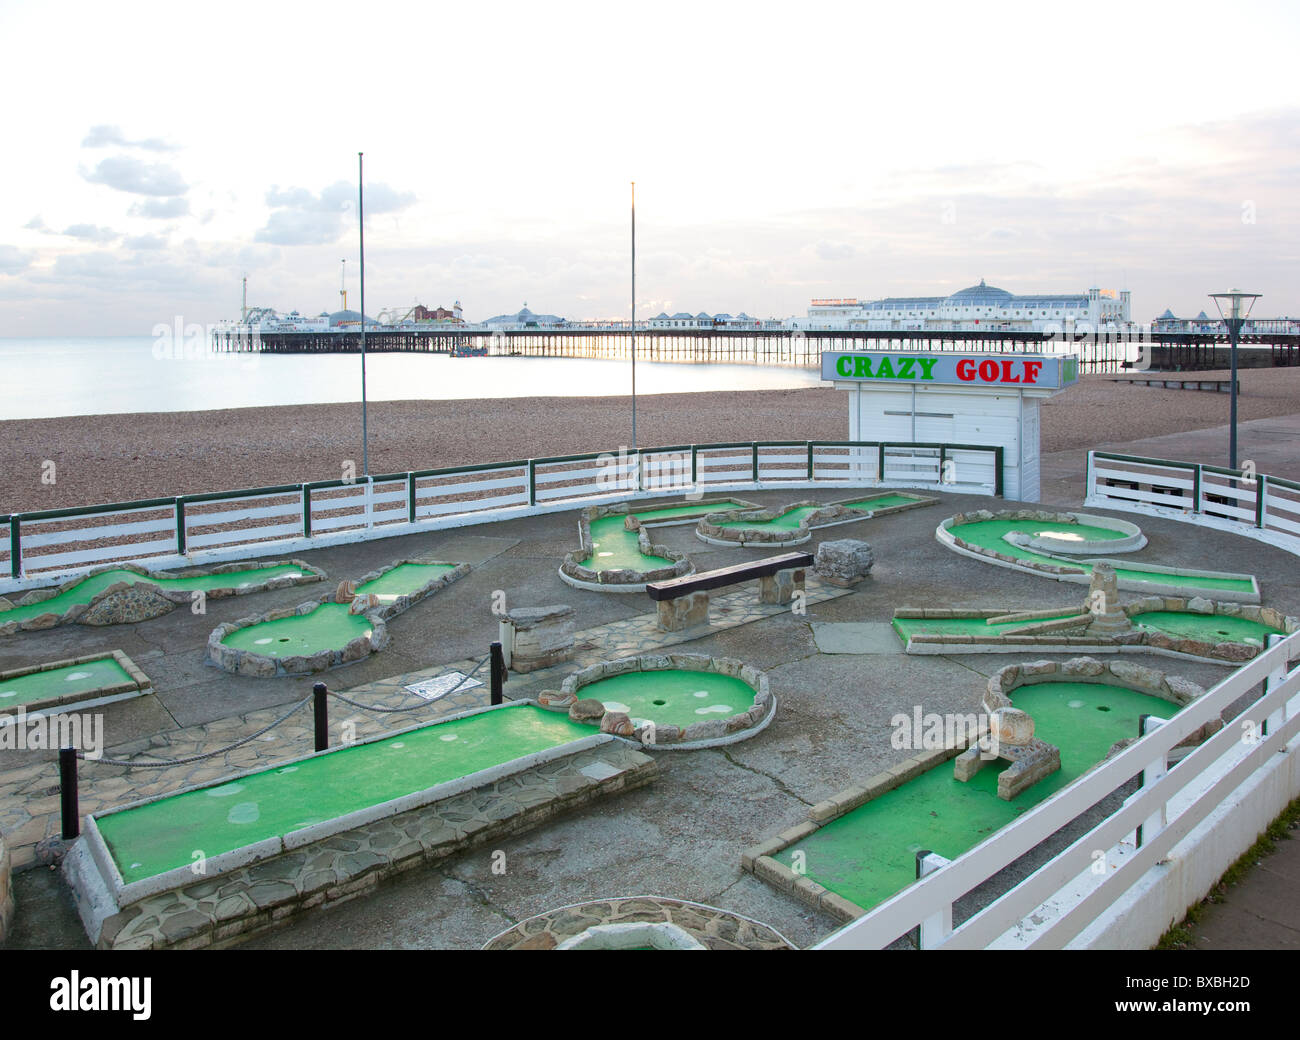 Crazy Golf on beach by Brighton Pier, East Sussex, UK, winter Stock Photo